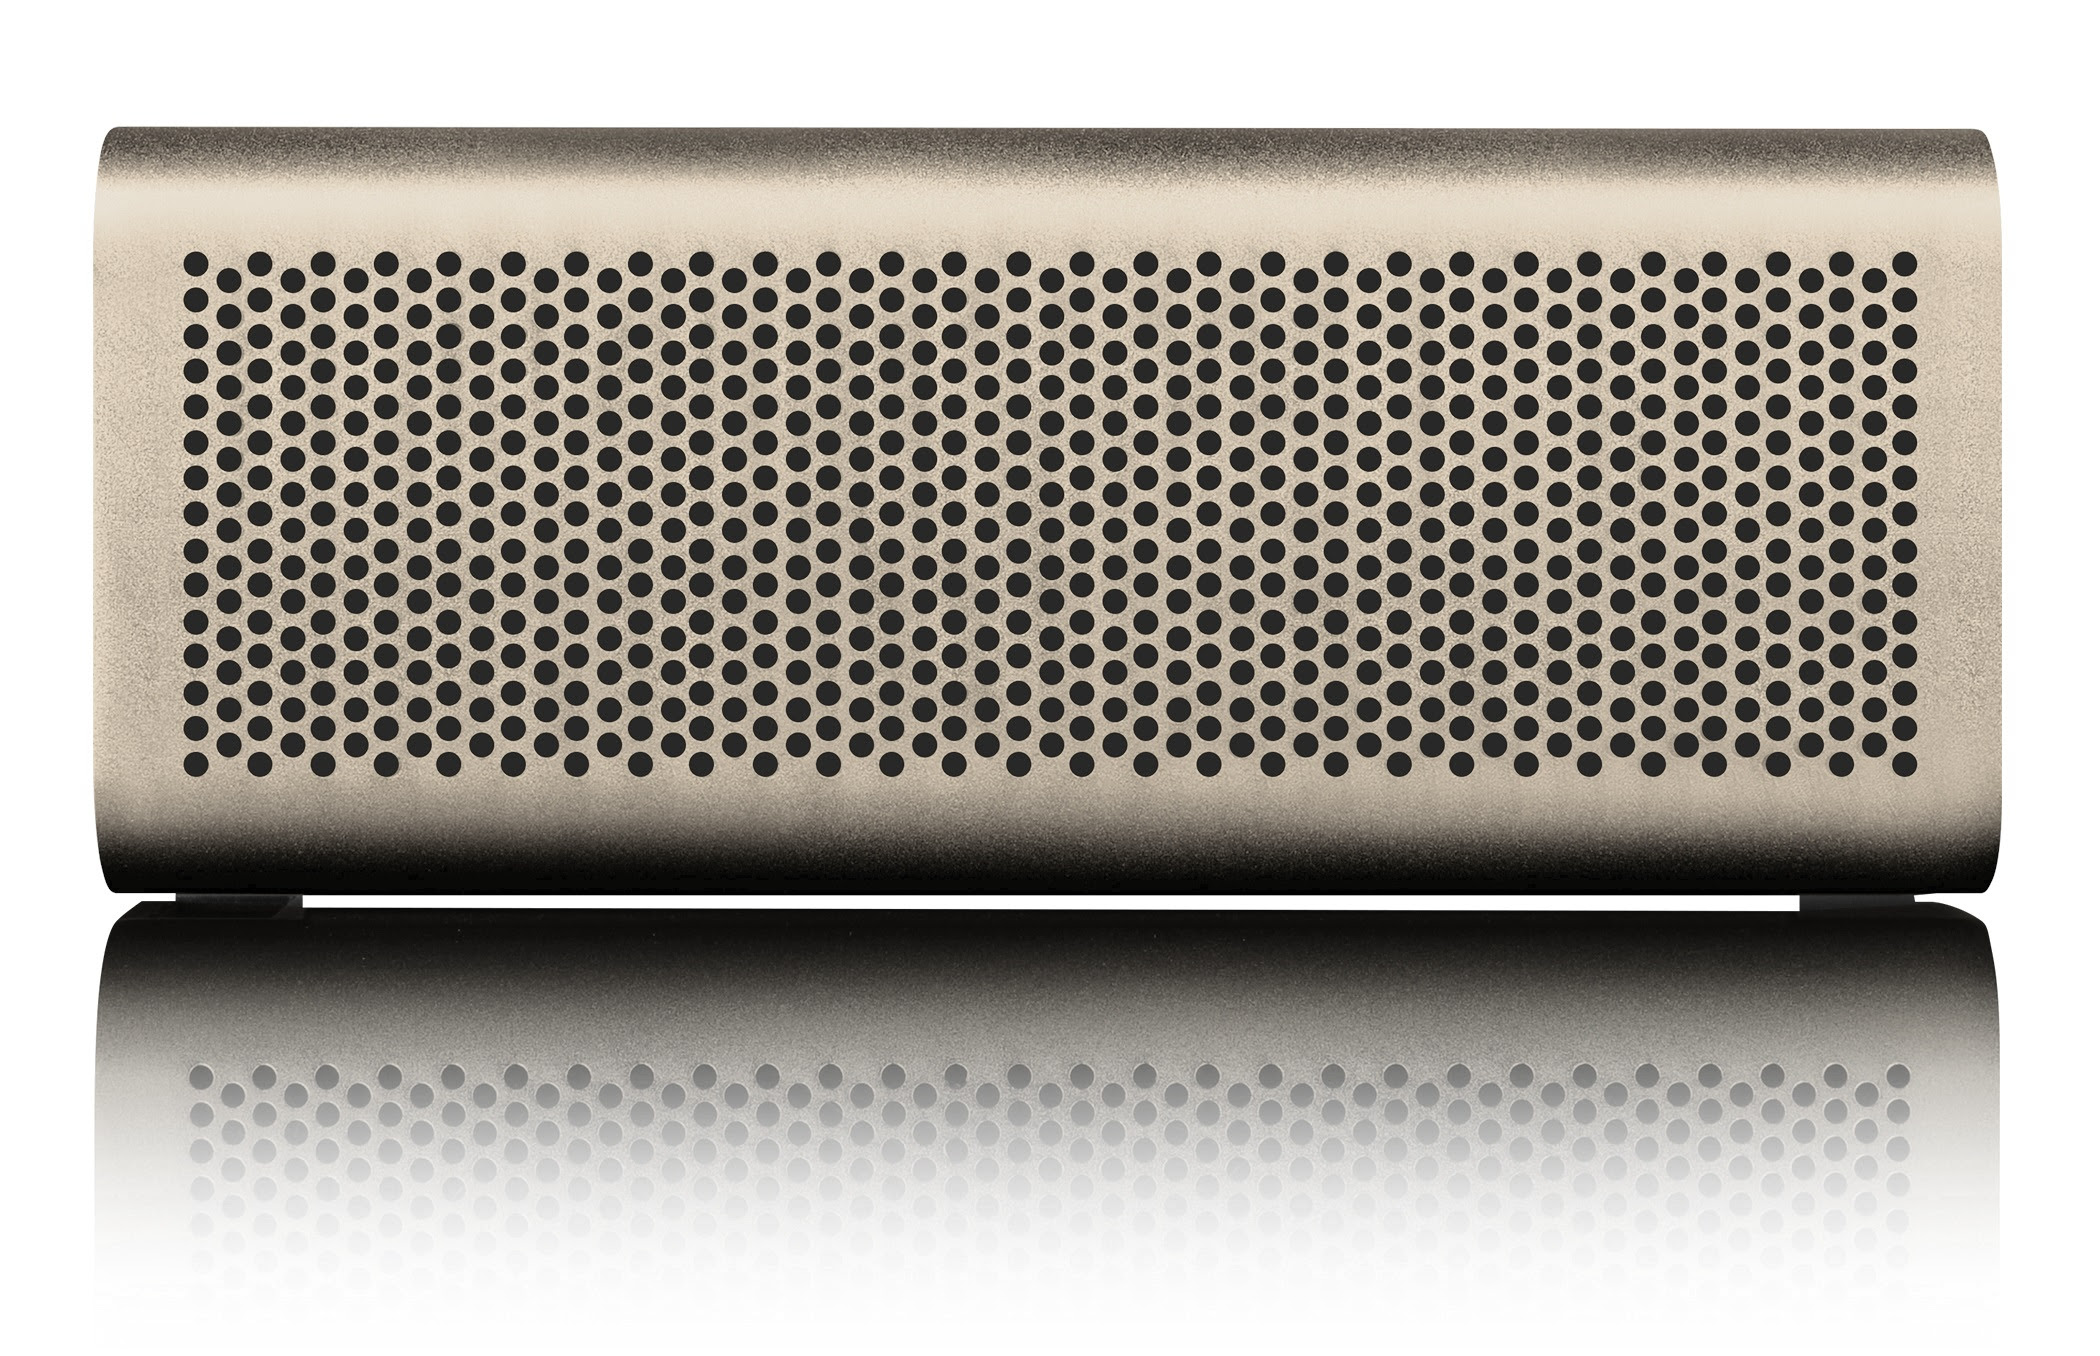 BRAVEN Acclaimed HD Wireless 710 Speaker Now Available in Limited Edition Gold